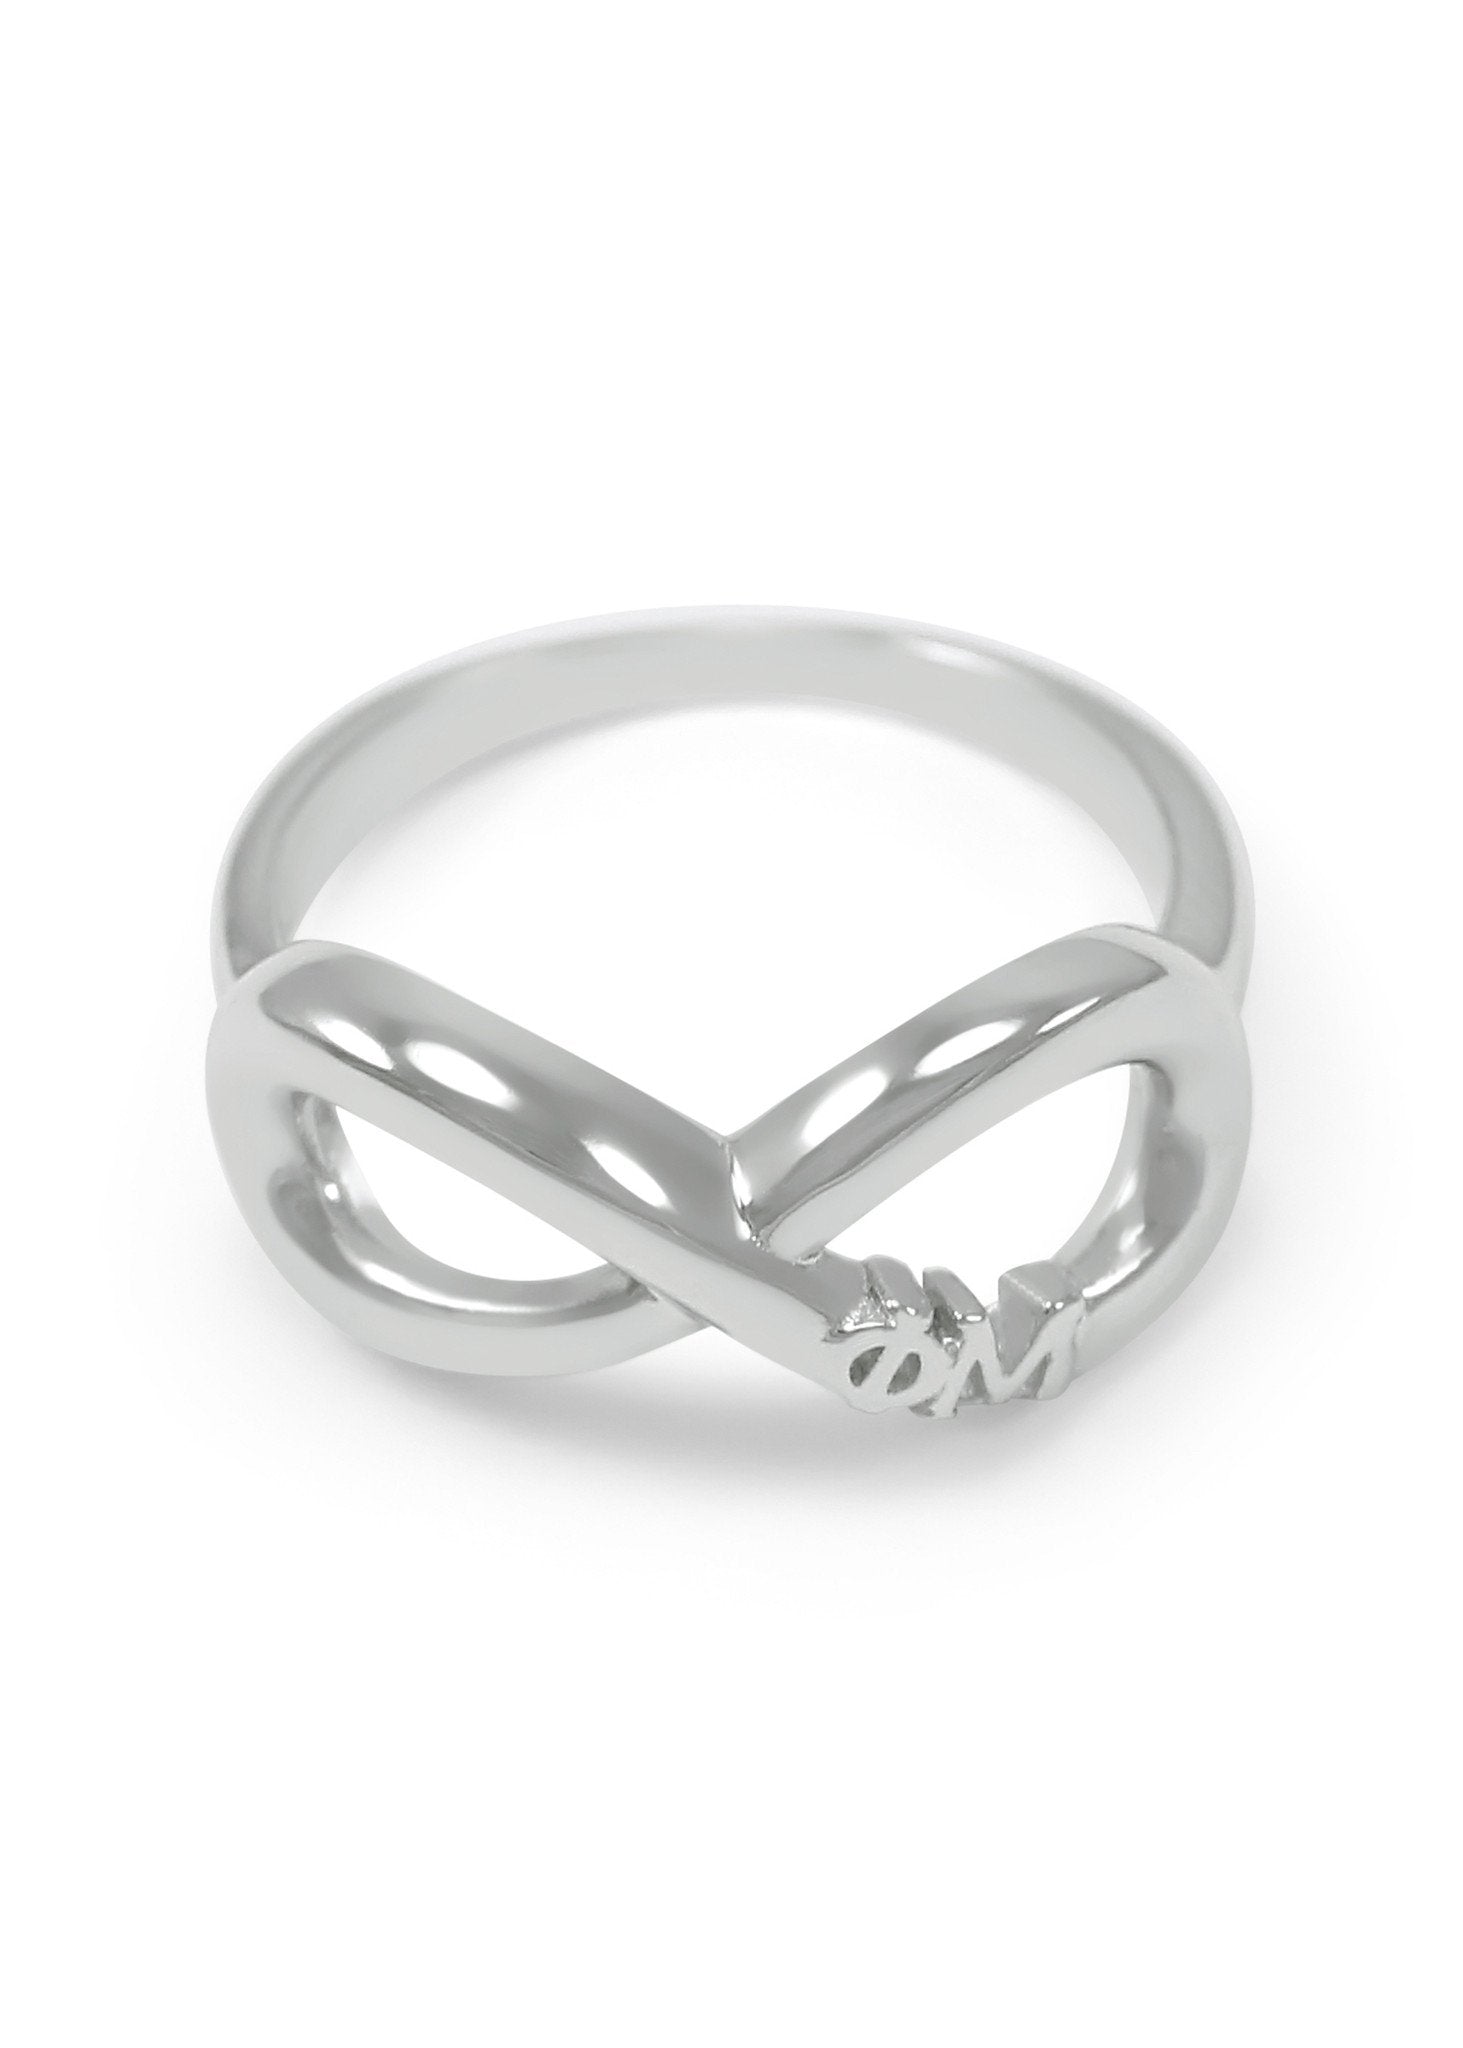 Tiffany Infinity ring in sterling silver. | Tiffany & Co.